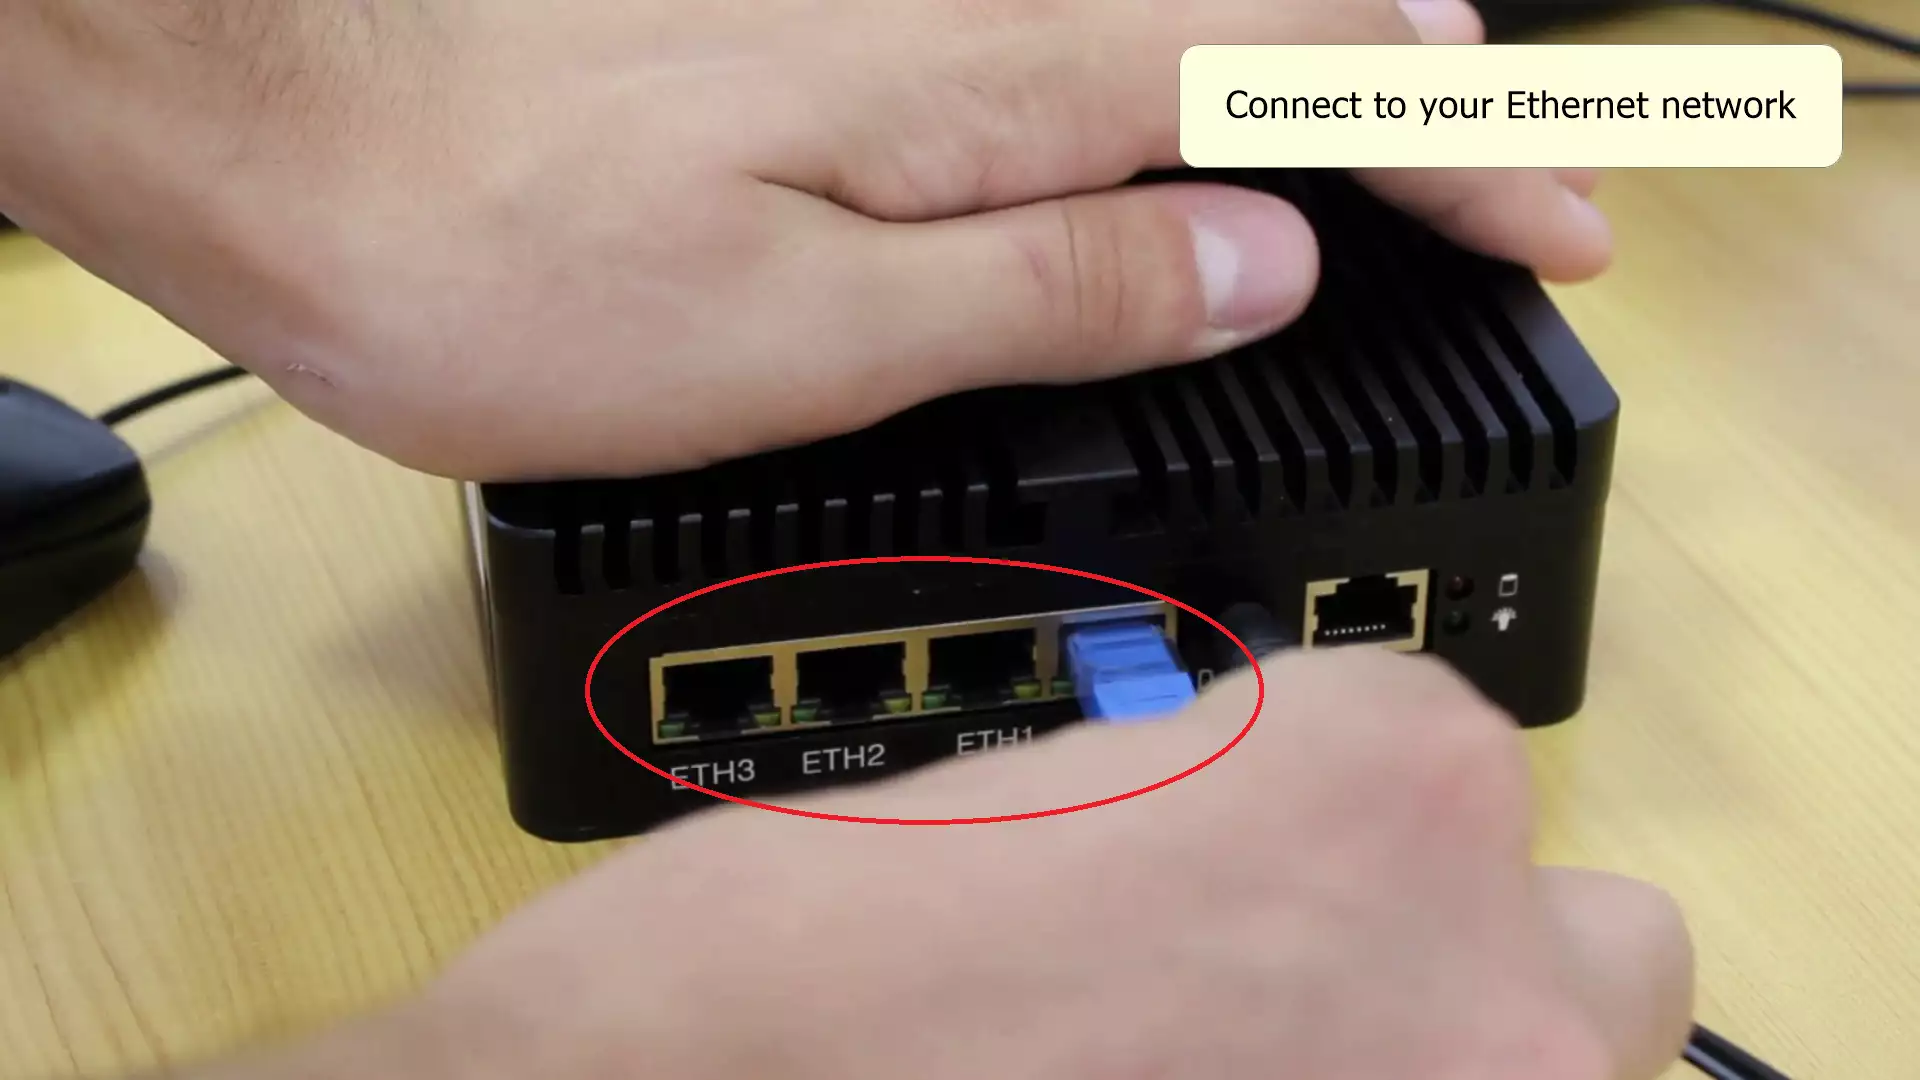 connect your computer to ethernet via the eth0 to eth3 ports